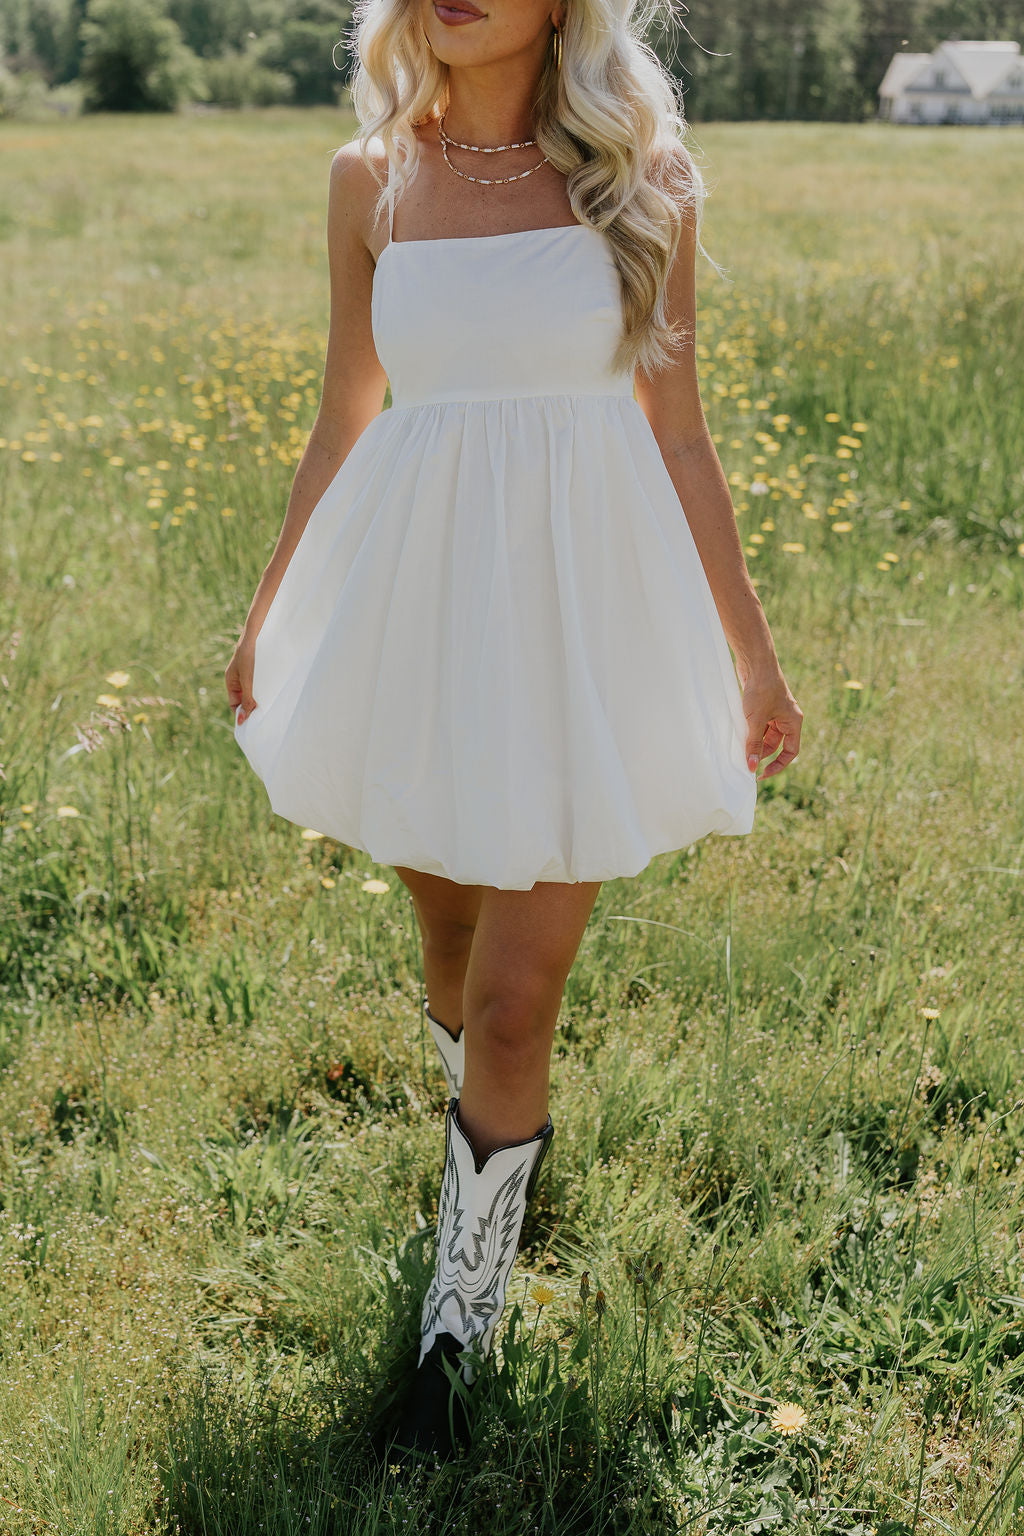 Front view of female model wearing the Rosemary White Bubble Hem Mini Dress that has white fabric, a bubble hem, and thin straps.